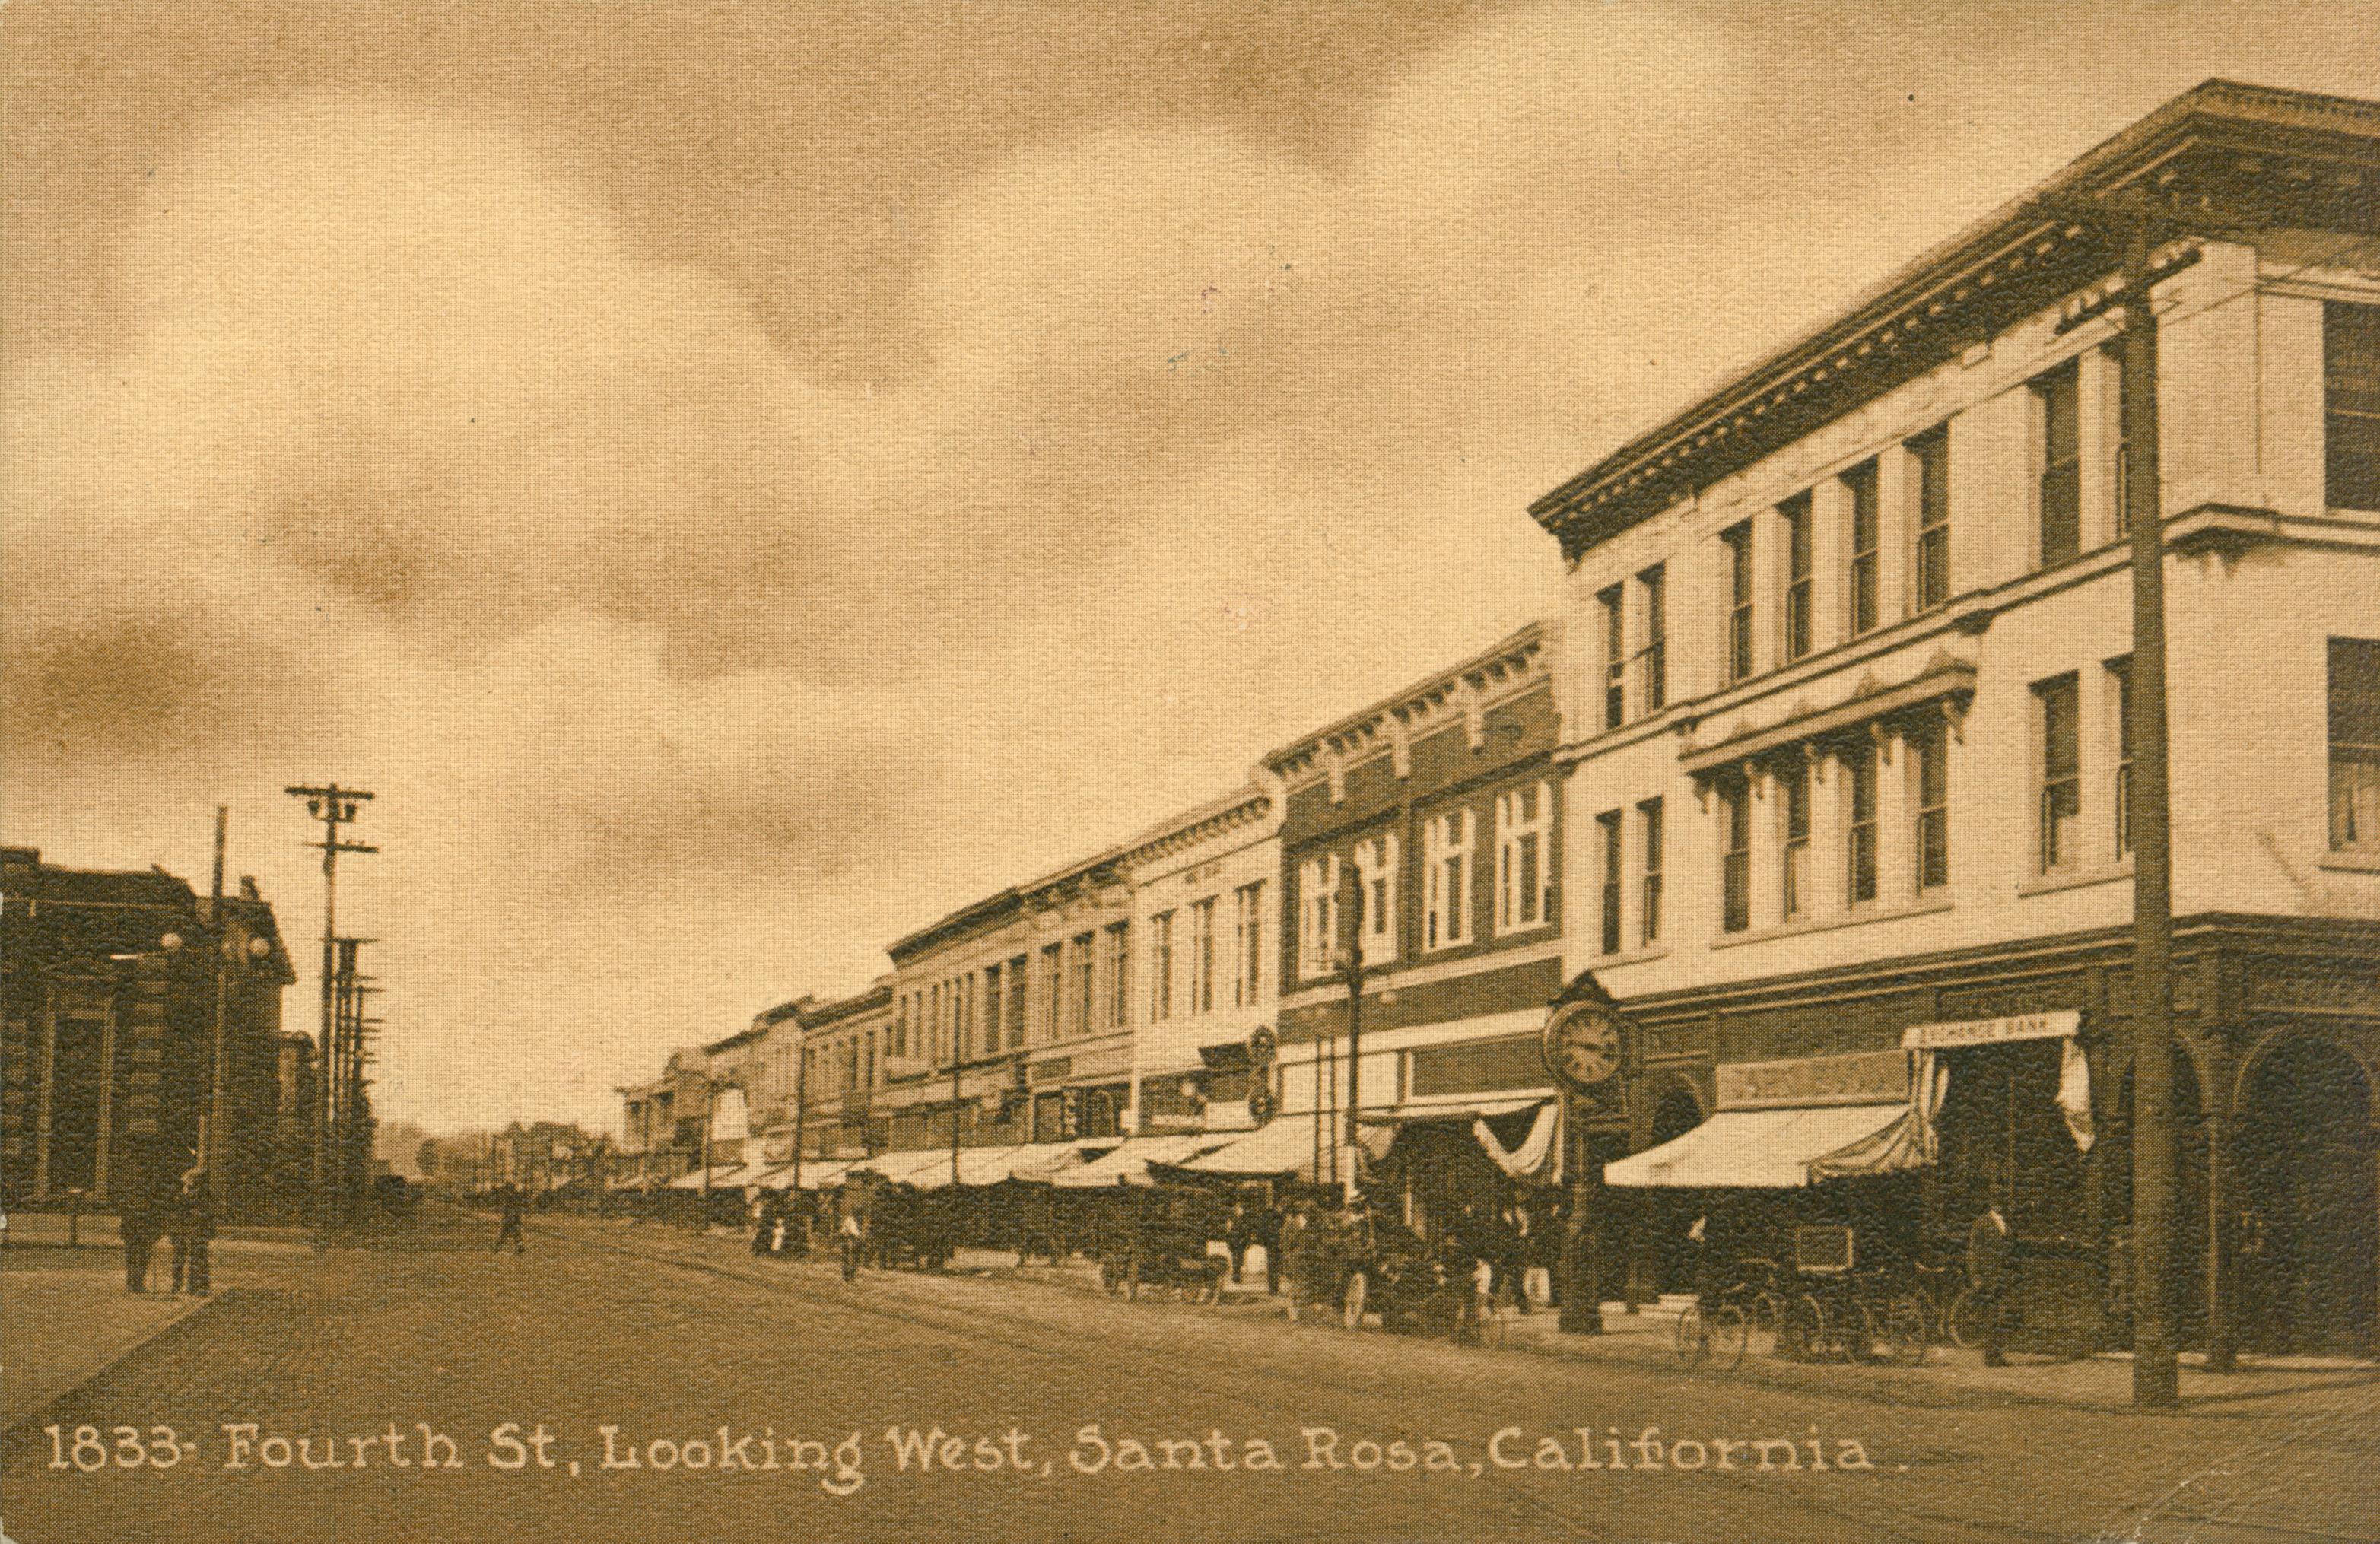 Shows a street in Santa Rosa, lined by buildings